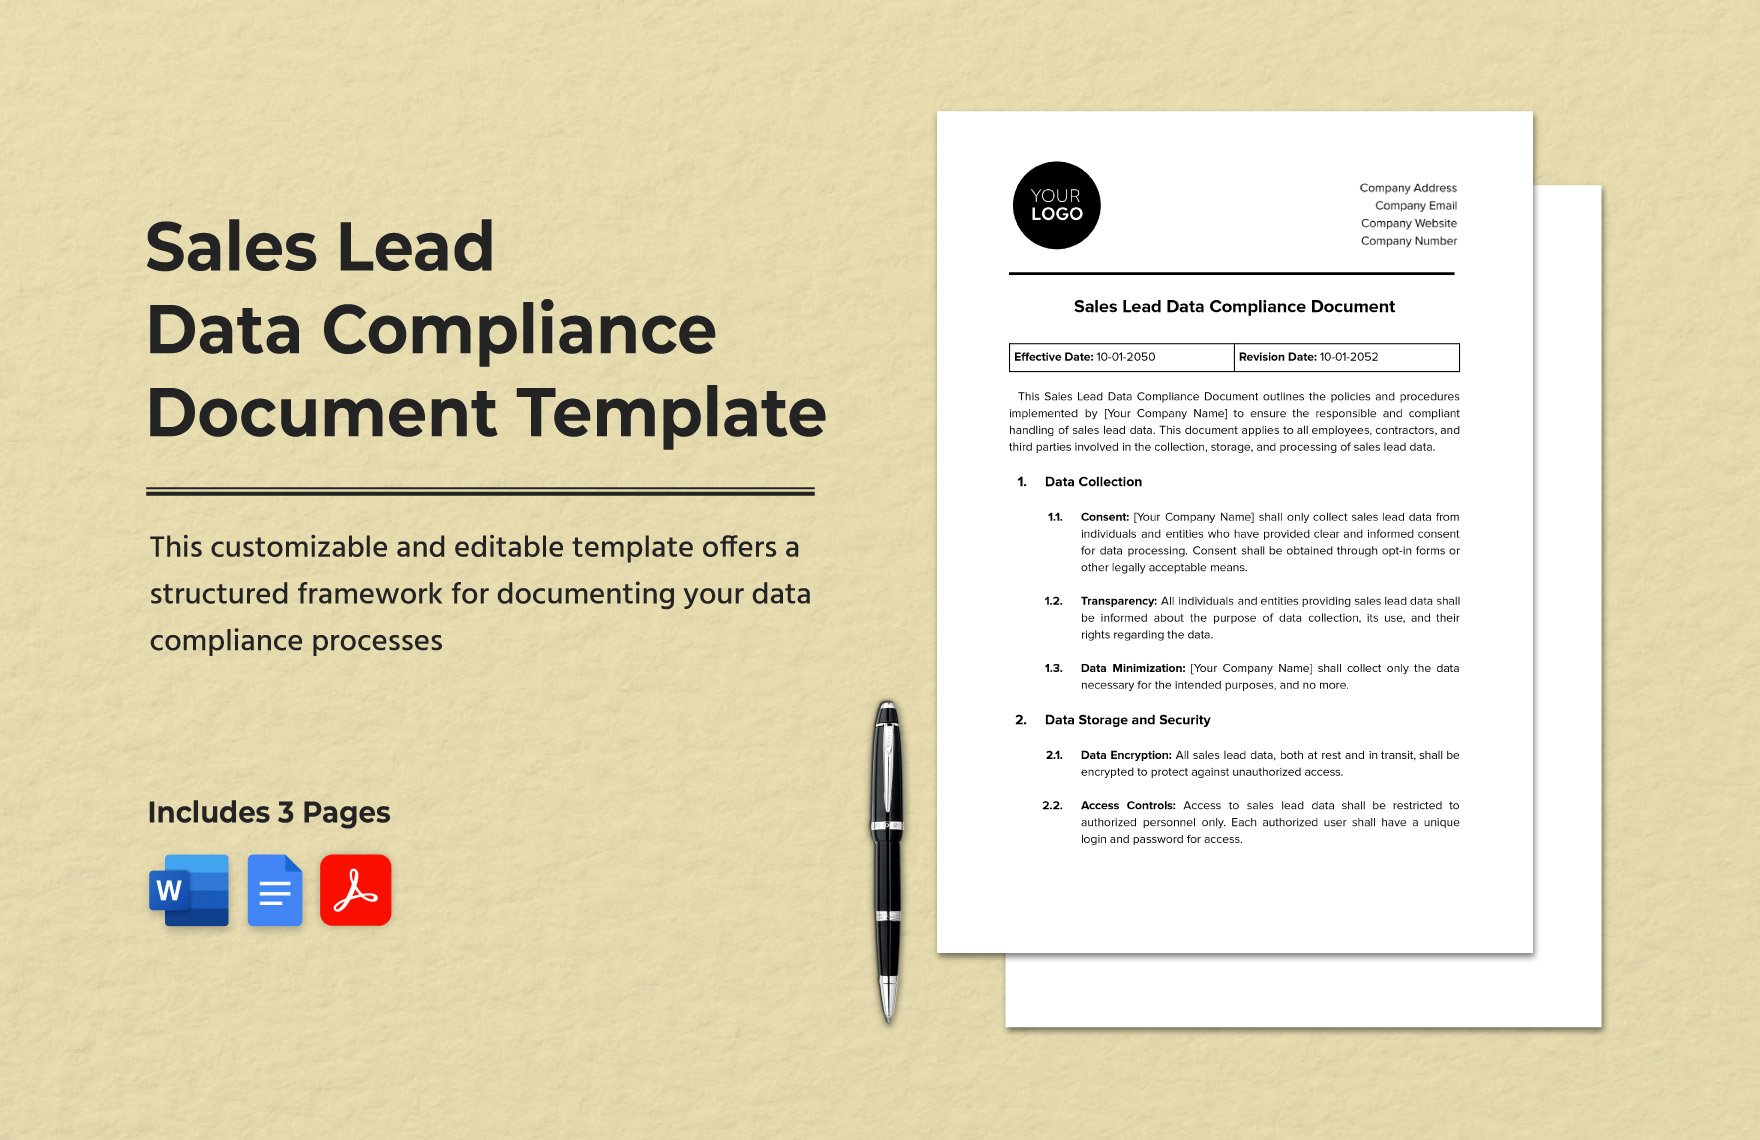 Sales Lead Data Compliance Document Template in Word, Google Docs, PDF